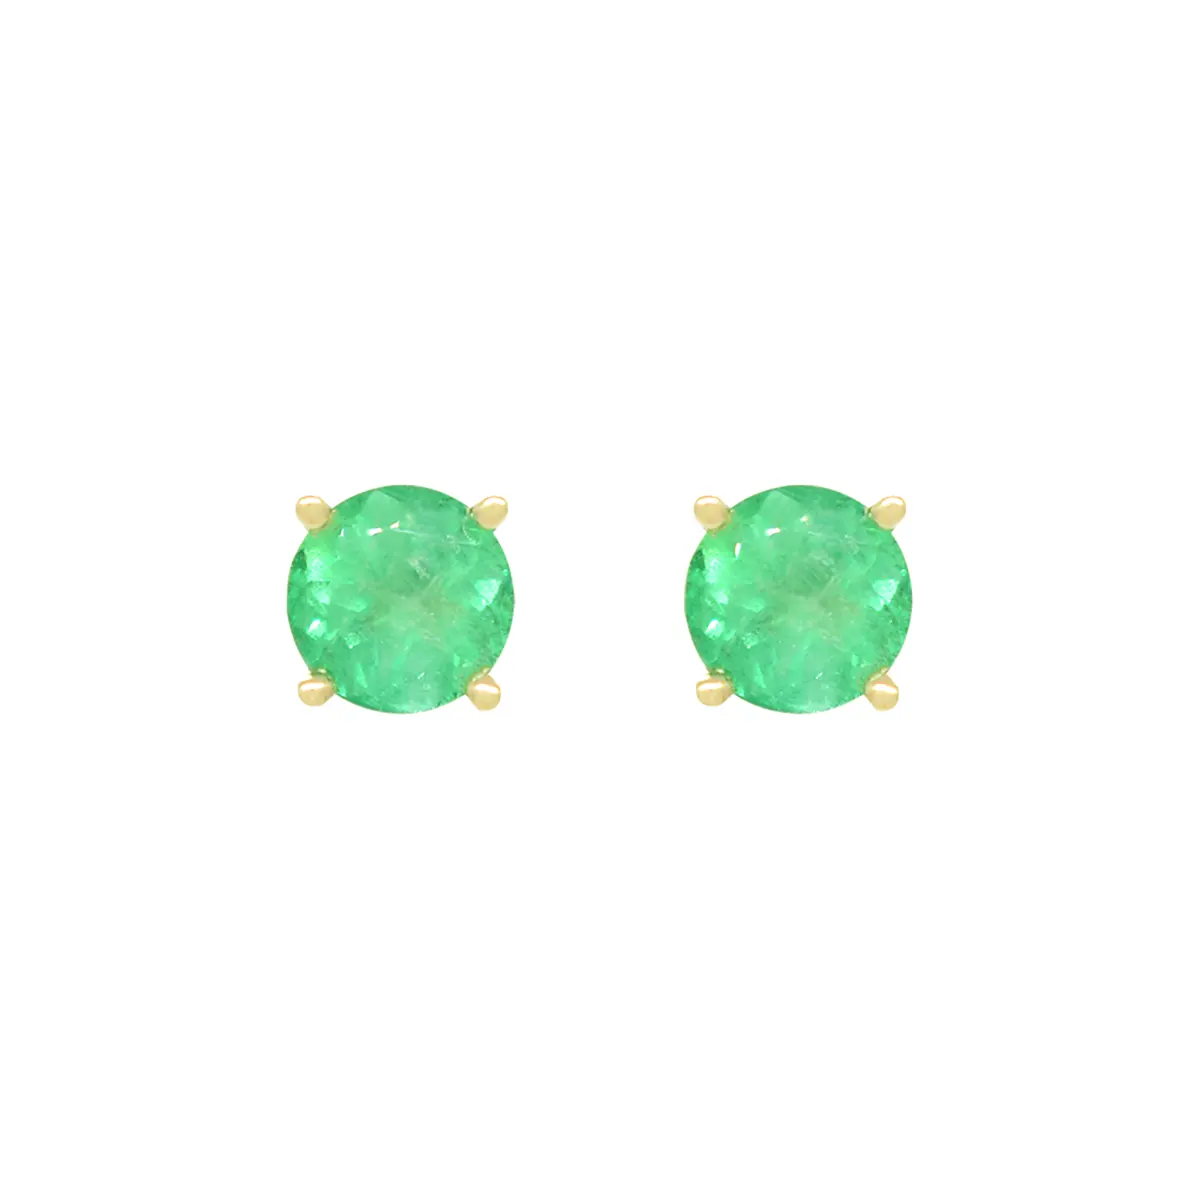 Stud Emerald Earrings in 18K Yellow Gold With Round Cut Natural Emeralds